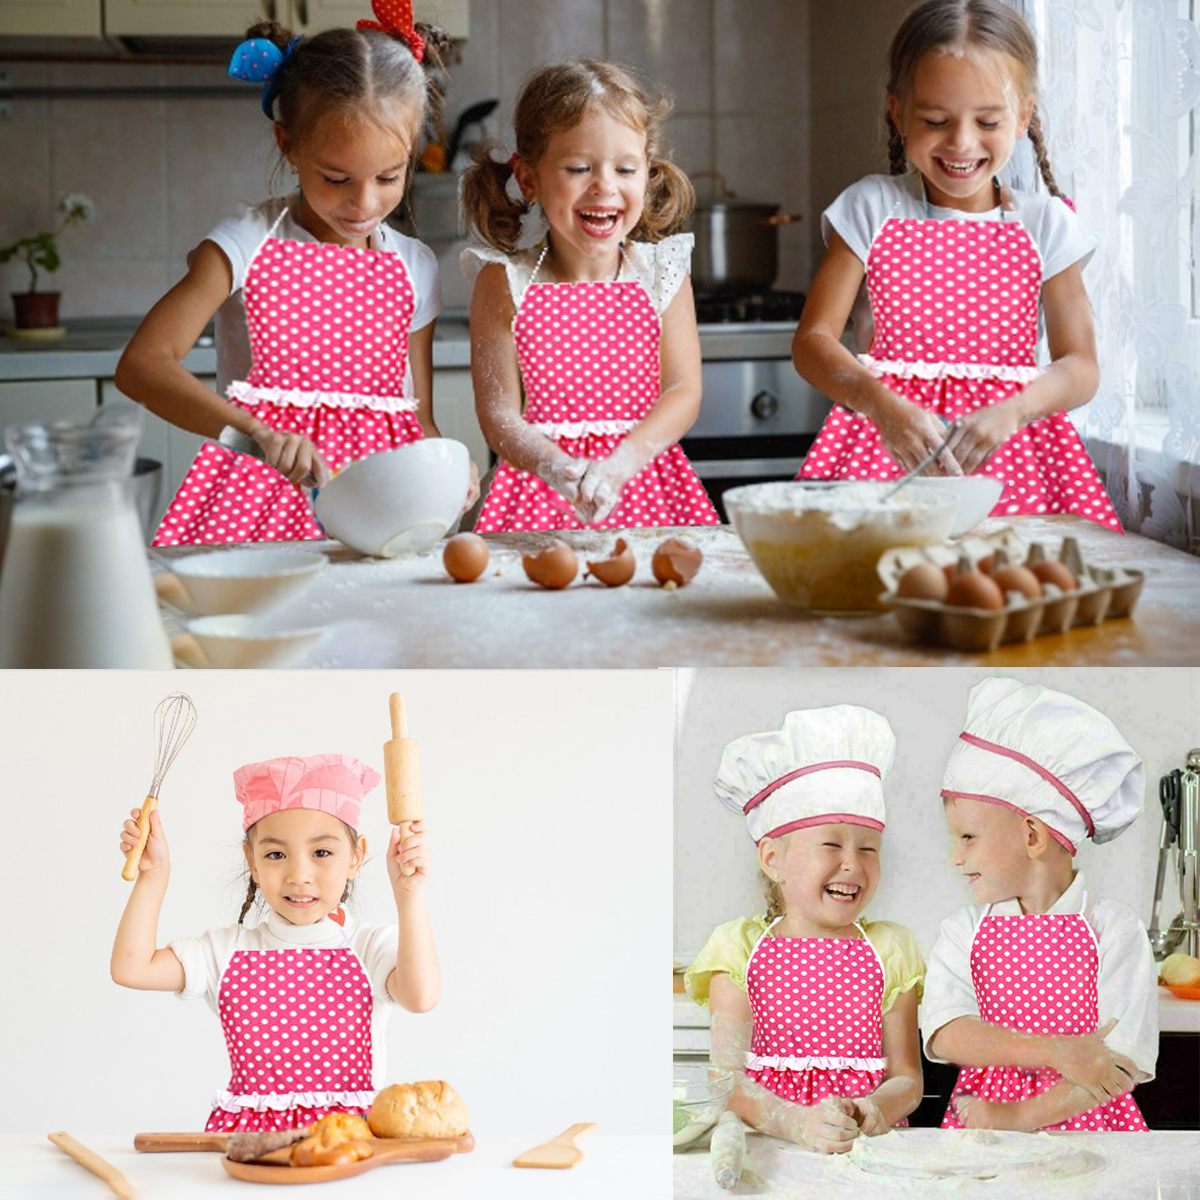 13Pcs-Apron-Kids-Cooking-Baking-Set-Kitchen-Girls-Toys-Chef-Role-Play-Children-Costume-Pretend-Play--1815763-12